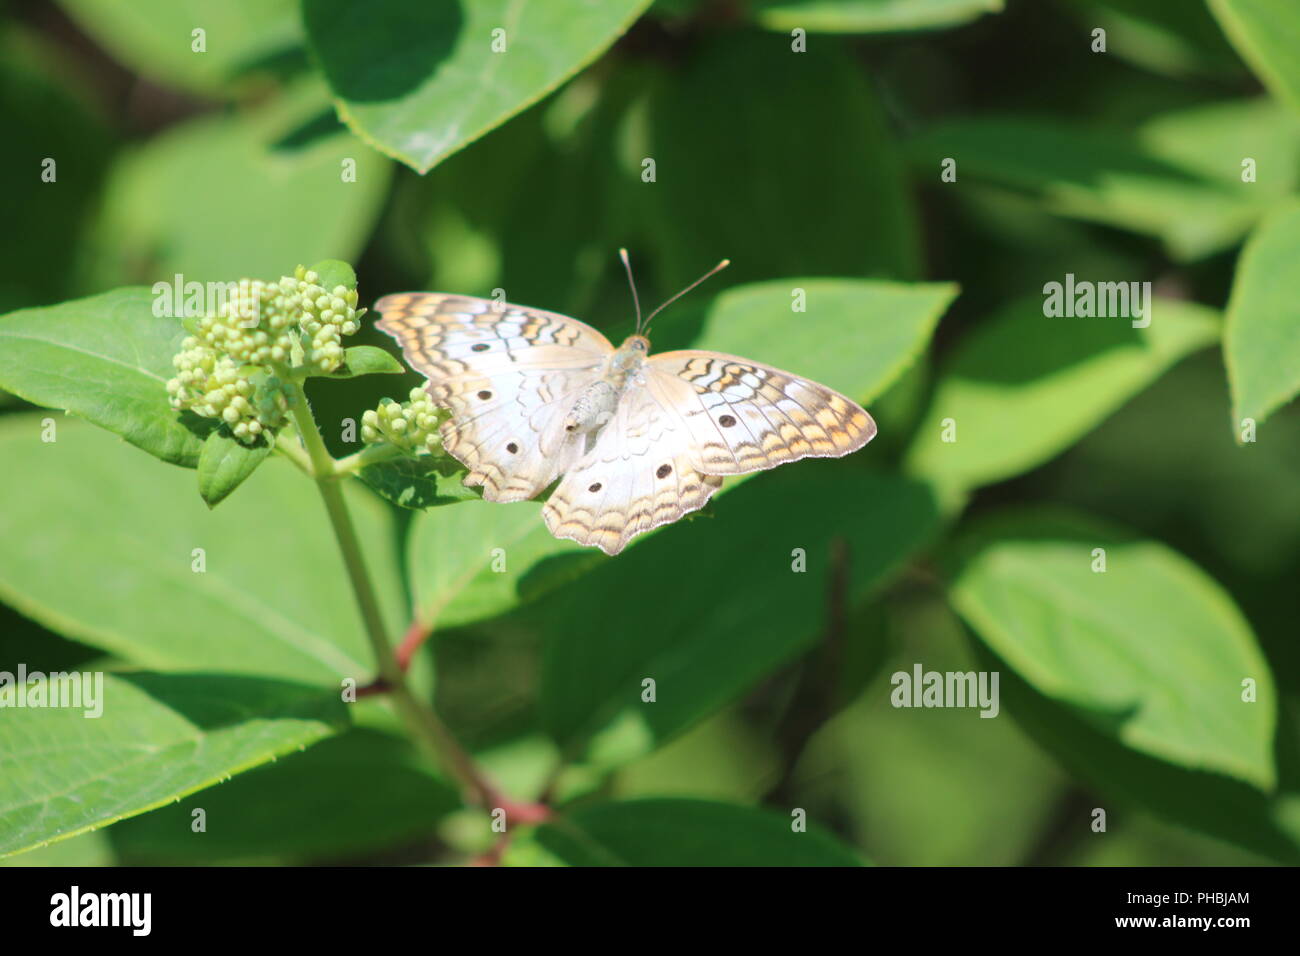 White Peacock Butterfly resting among leaves Stock Photo